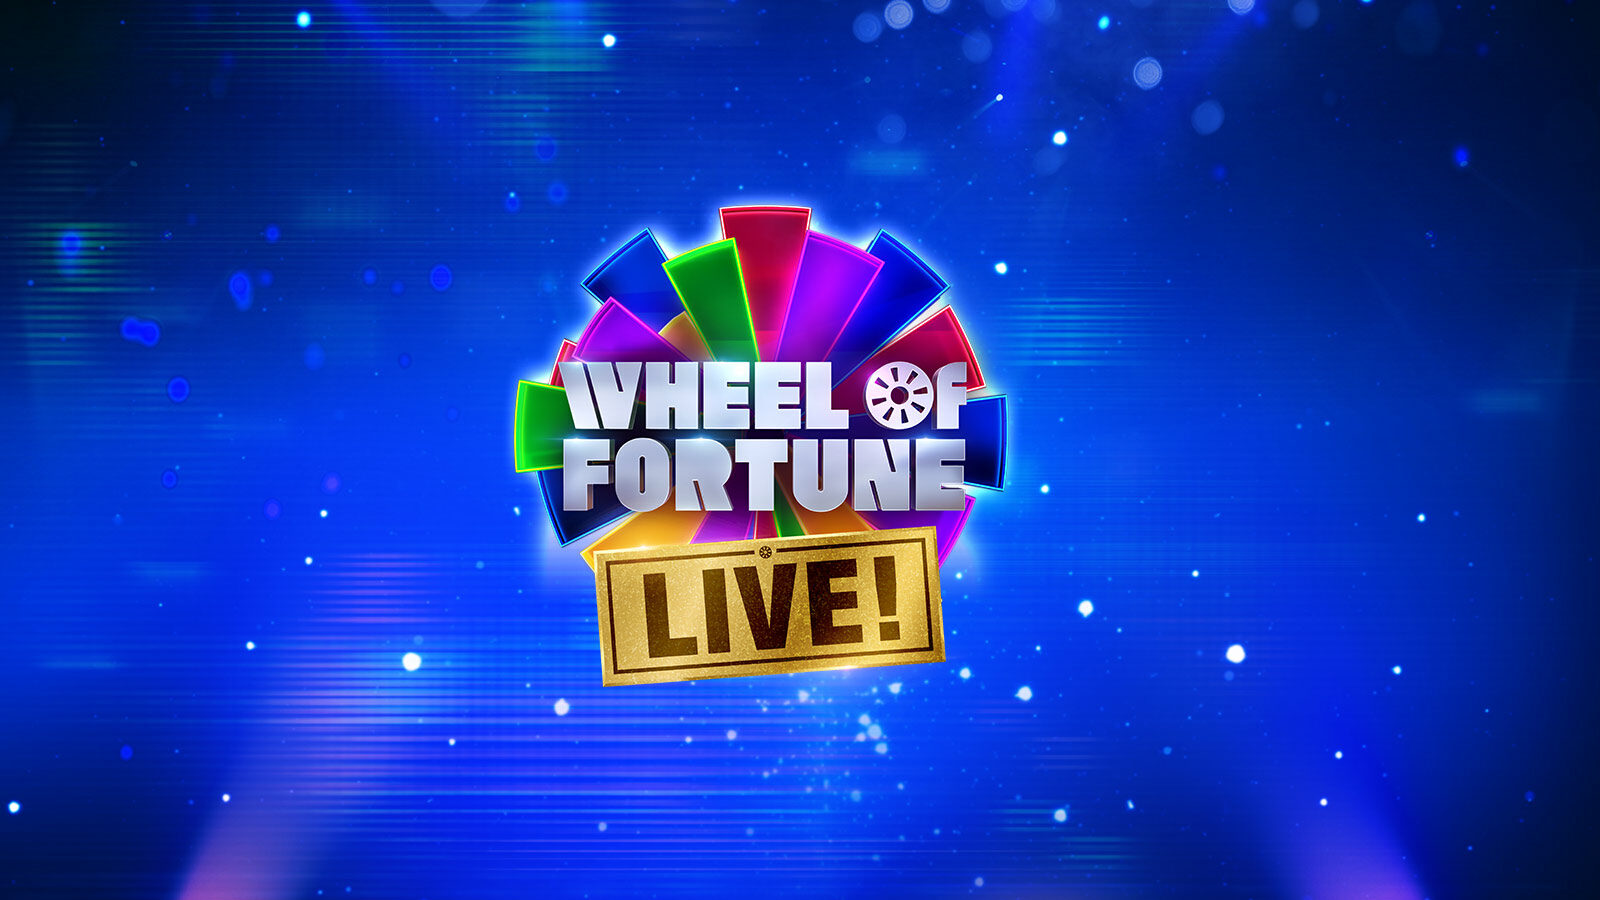 Wheel Of Fortune Live!